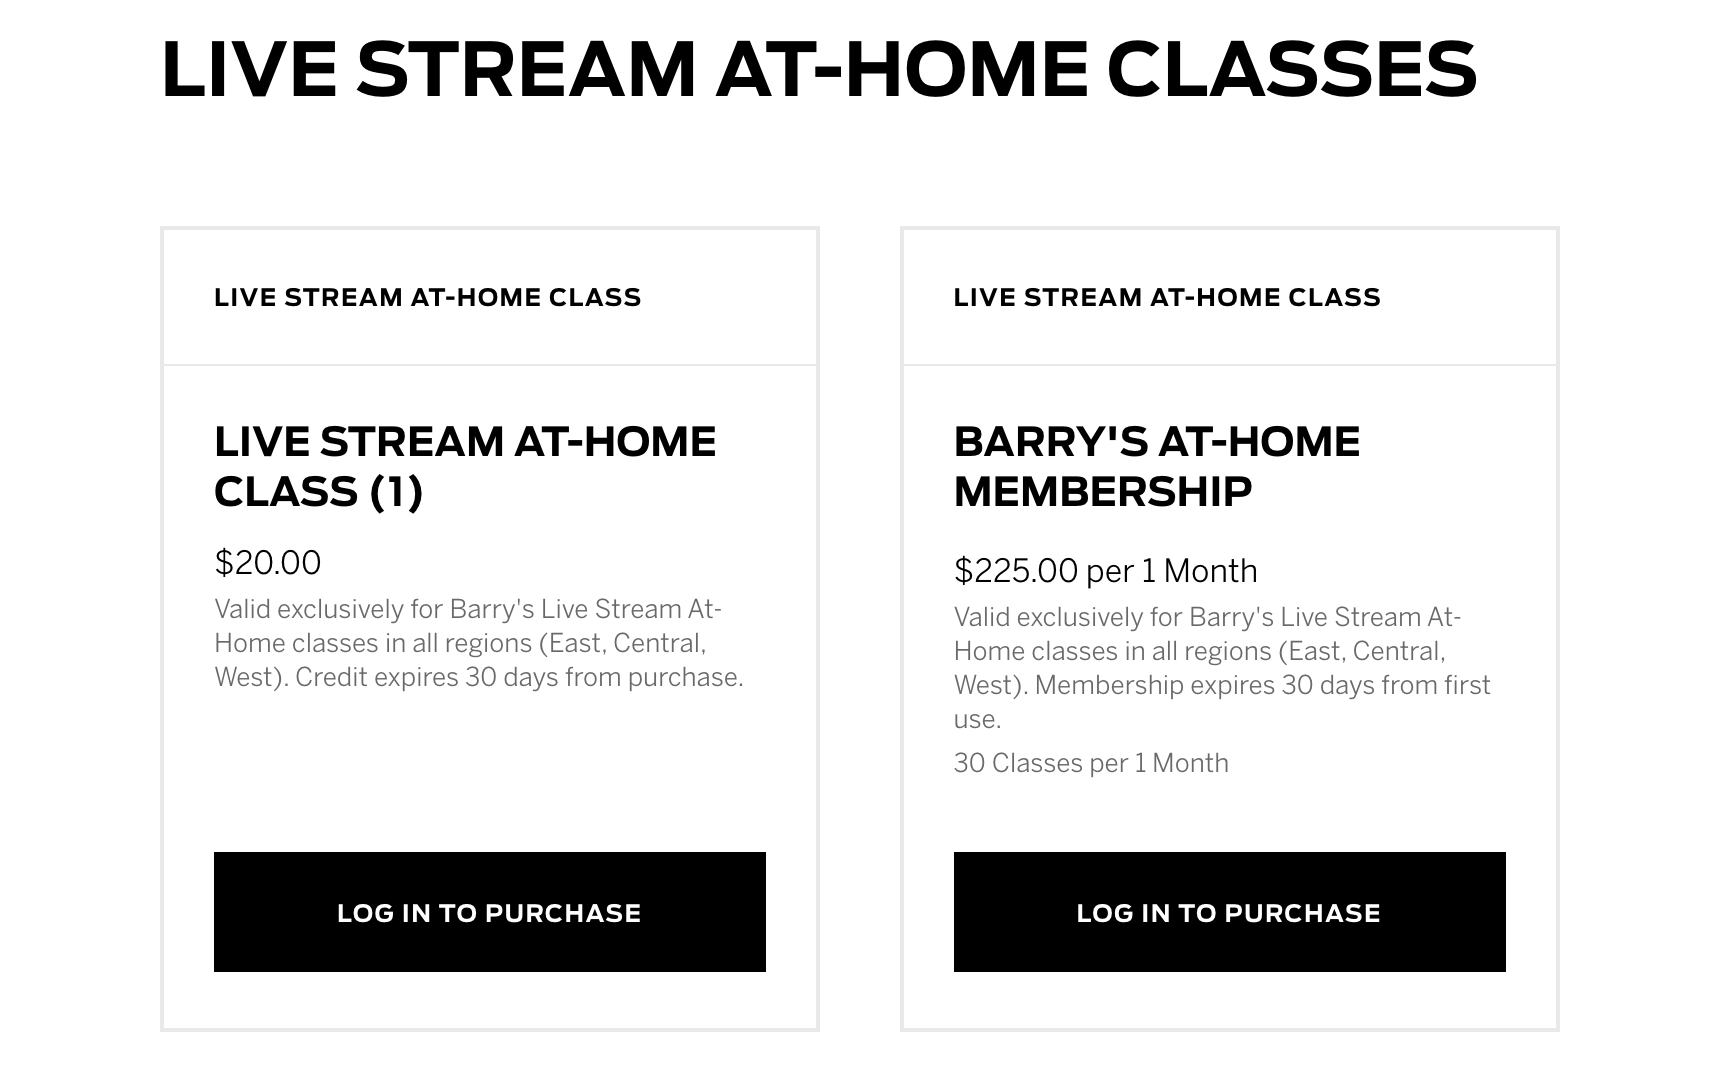 Barry’s At Home class pricing structure.